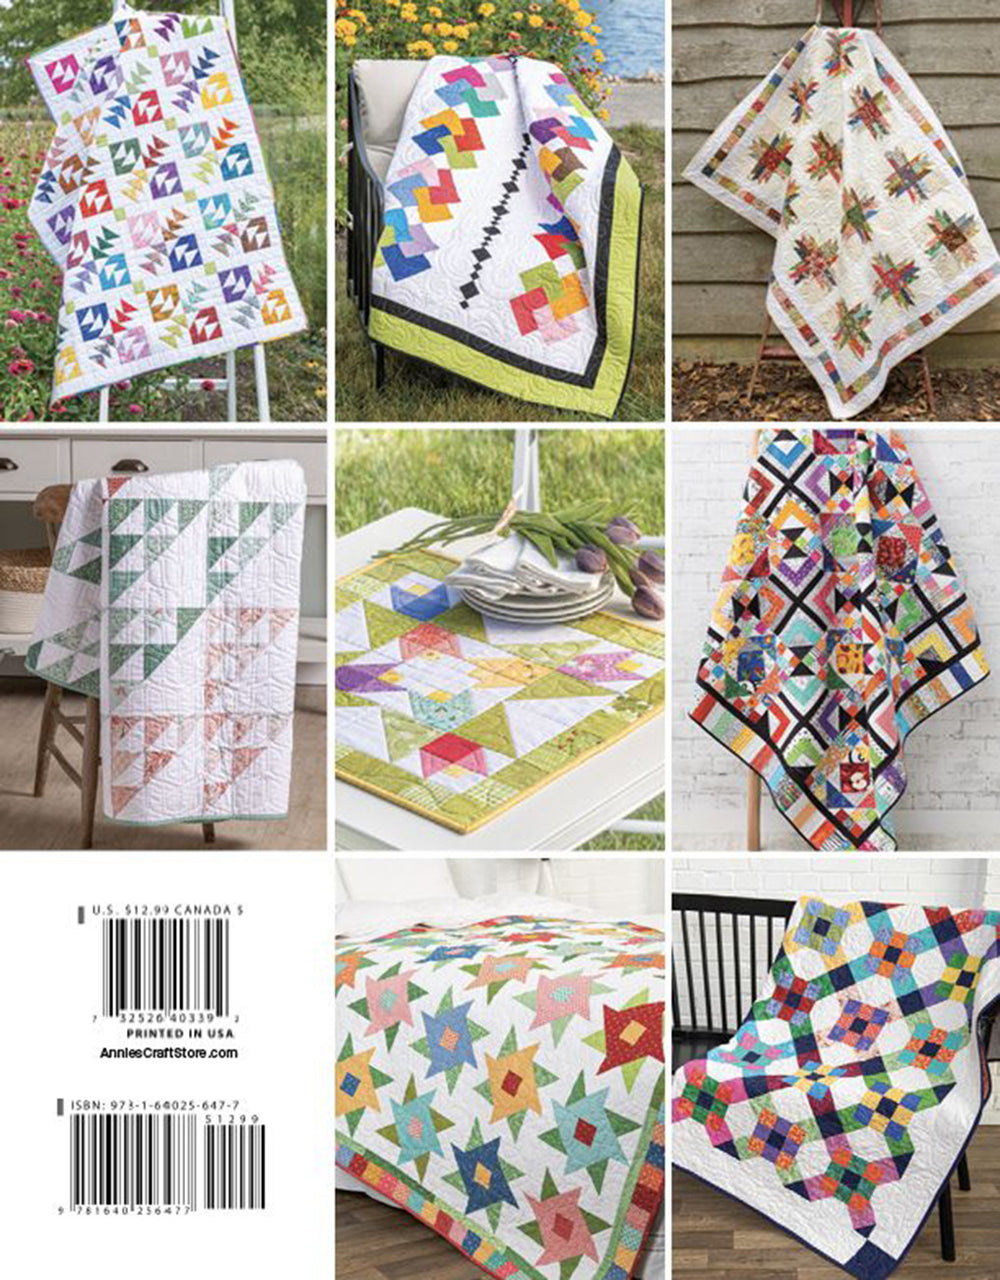 Scrap-Happy Quilts Pattern Book